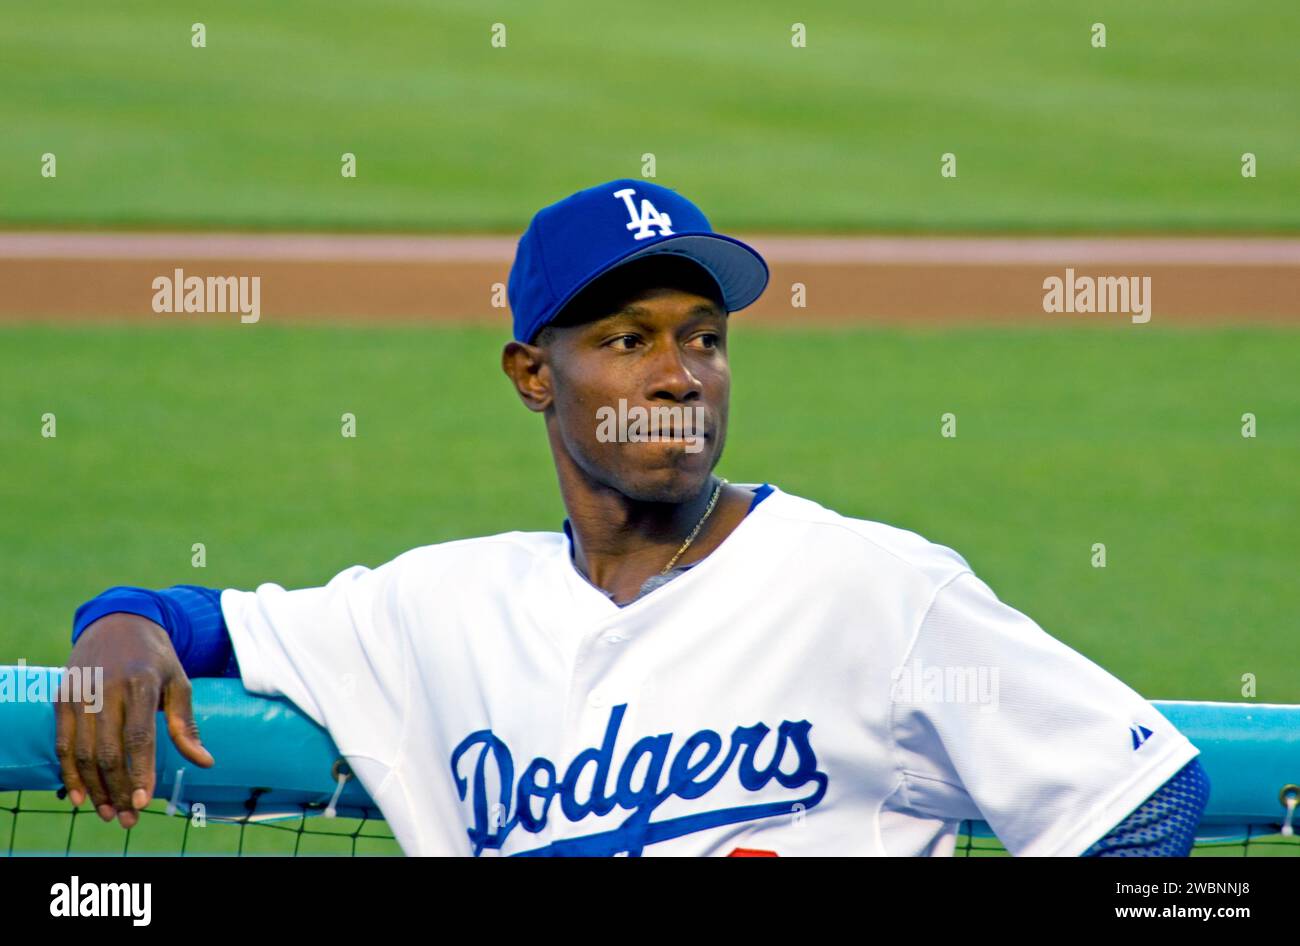 Juan Pierre in the dugout with the Los Angeles Dodgers during a game at Dodger Stadium, Los Angeles, California, USA Stock Photo